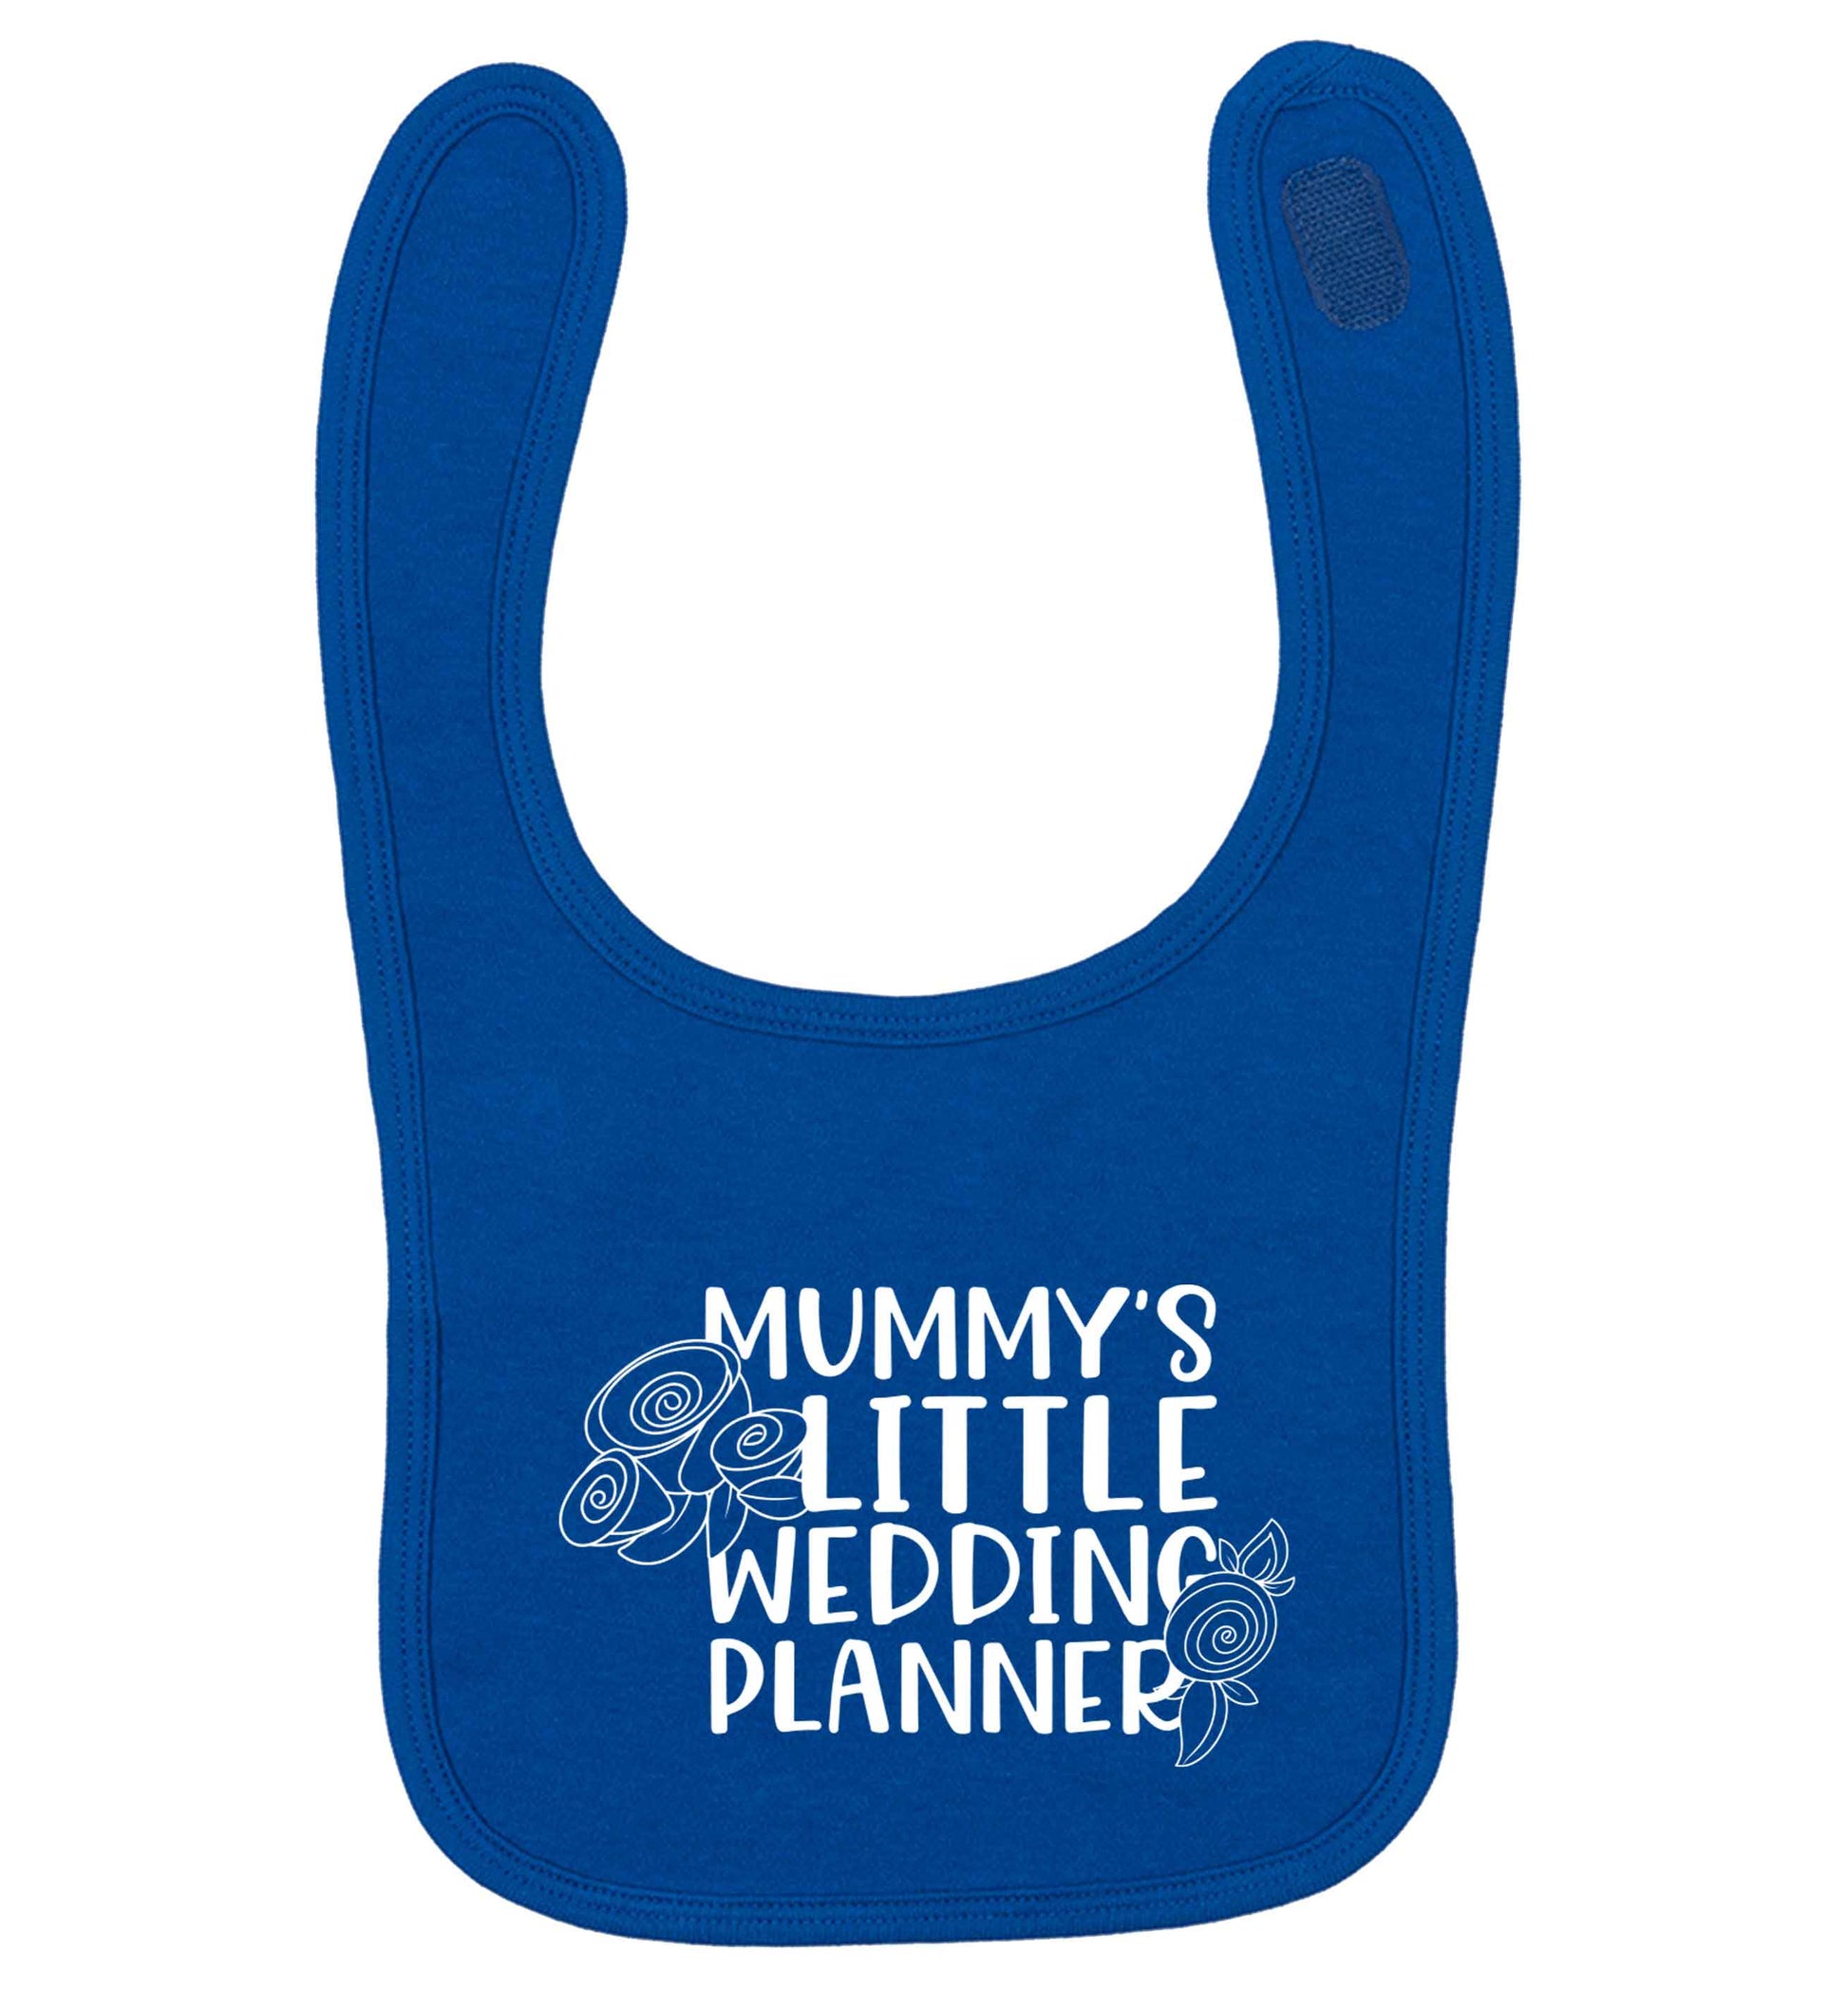 adorable wedding themed gifts for your mini wedding planner! royal blue baby bib